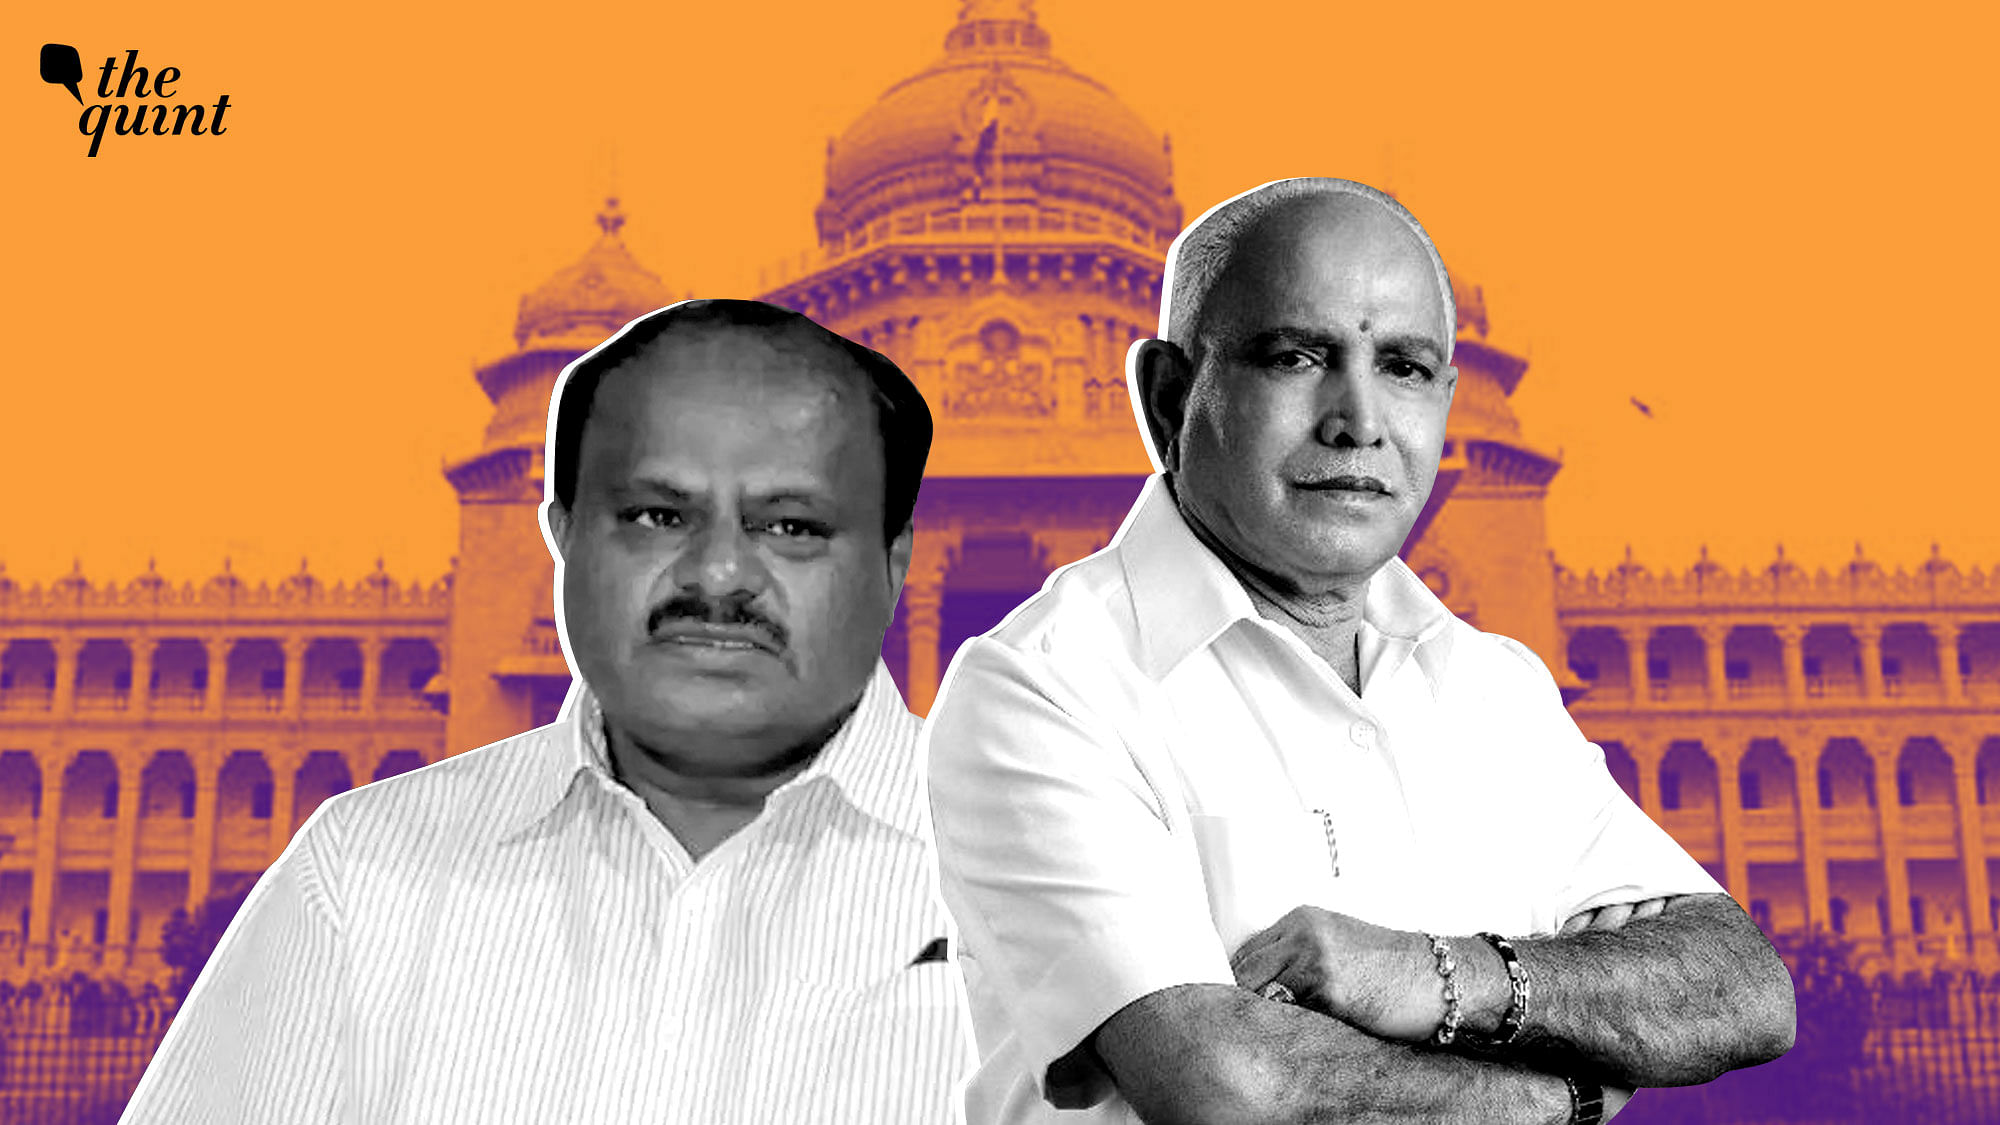 Yeddyurappa is getting to ready become chief minister again in the 15th assembly of Karnataka.&nbsp;